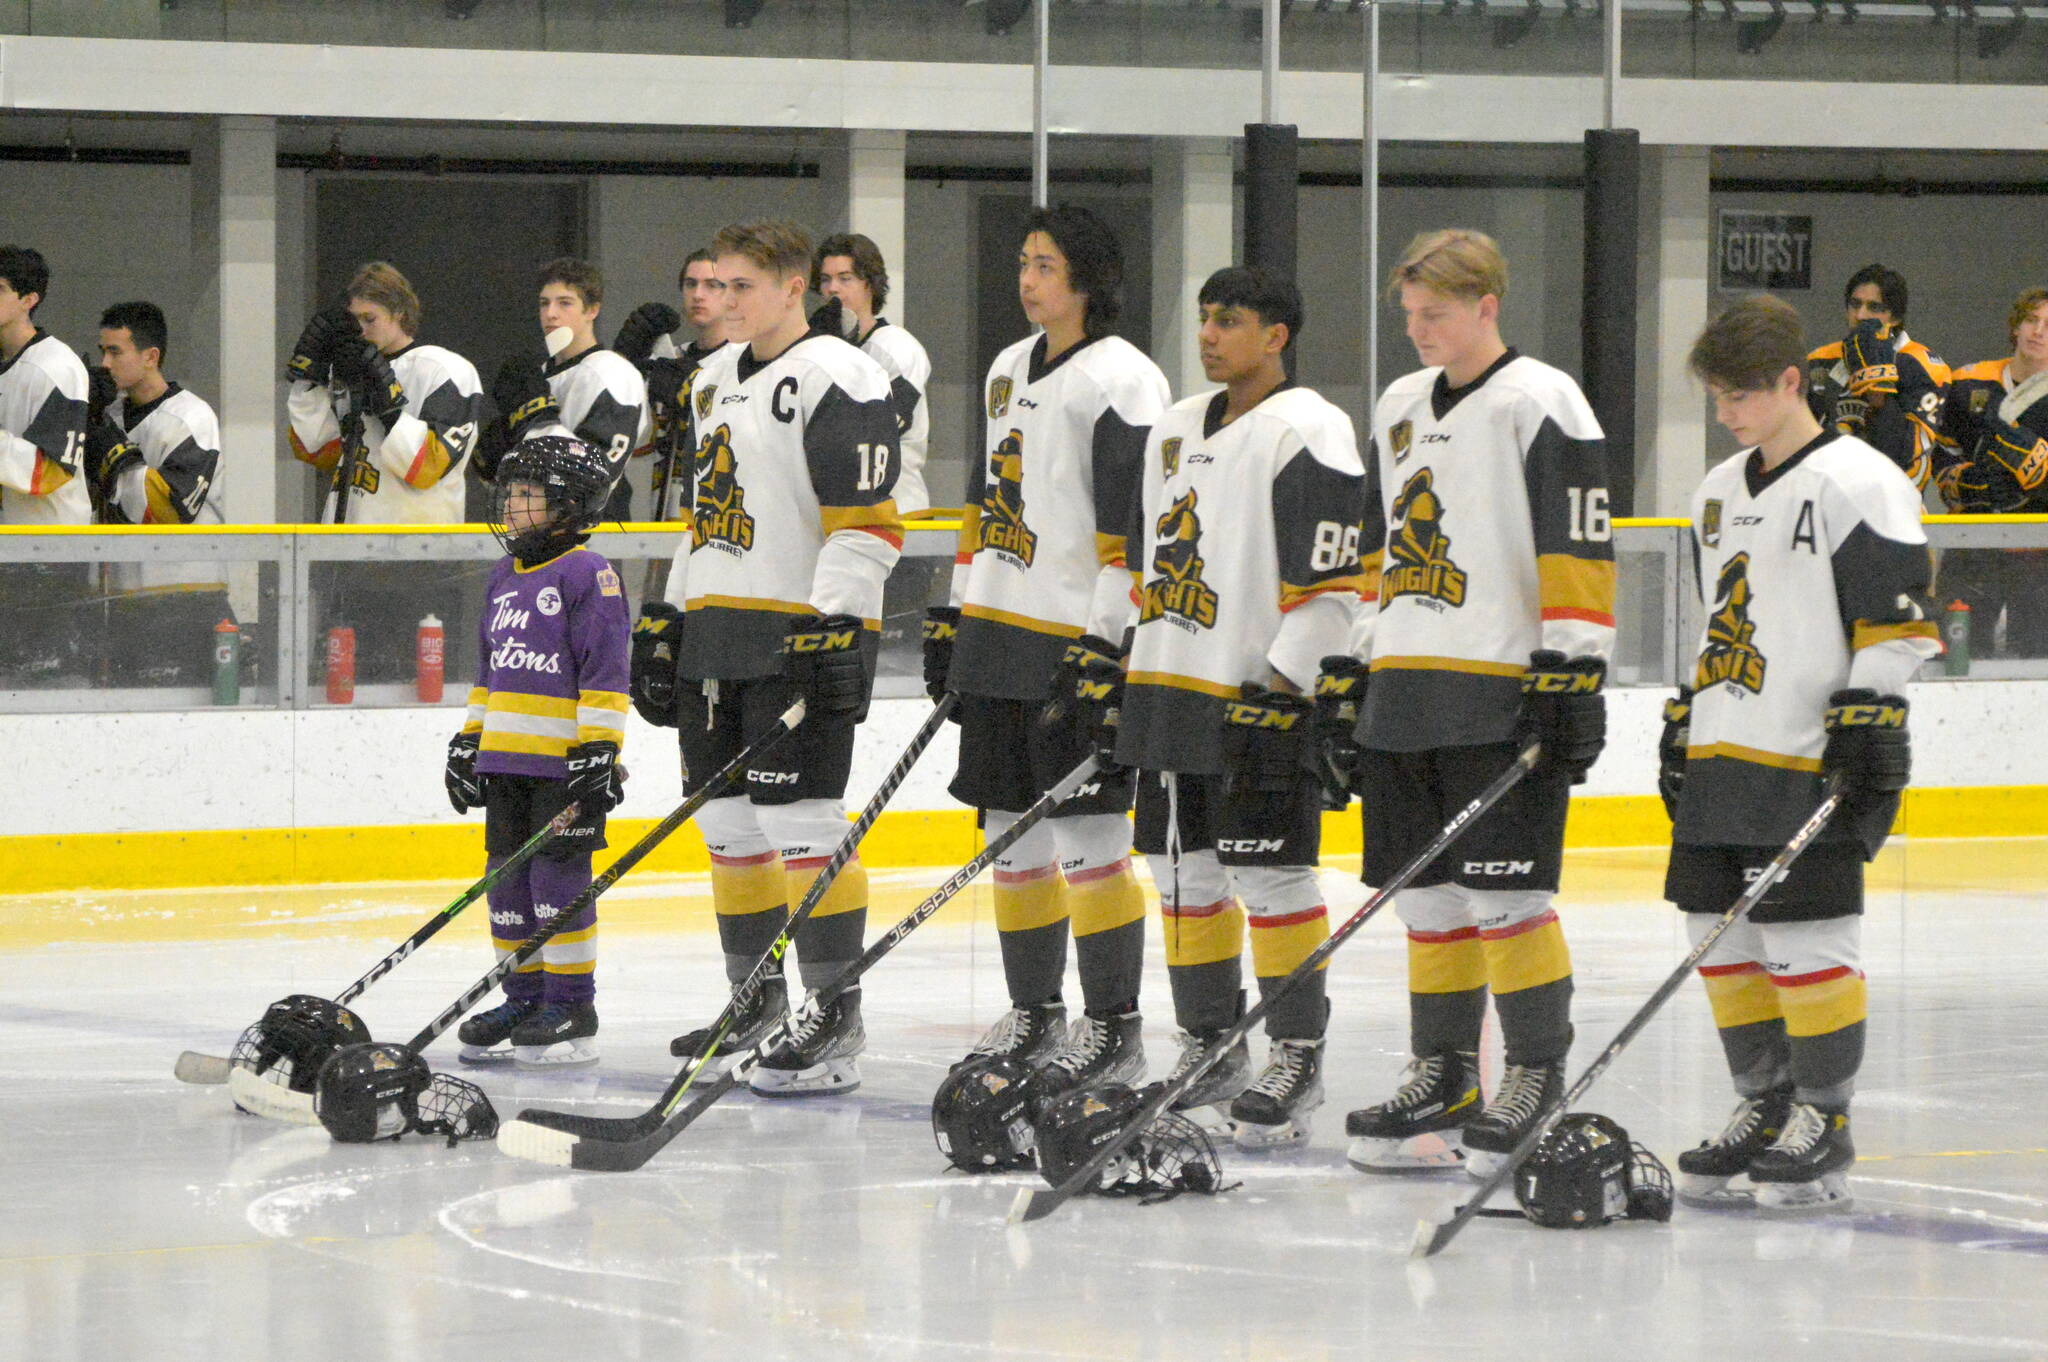 Surrey Knights players stand for "O Canada" during a game against Delta Ice Hawks at North Surrey Sport & Ice Complex on Thursday, Feb. 9, 2023. (Photo: Tom Zillich)